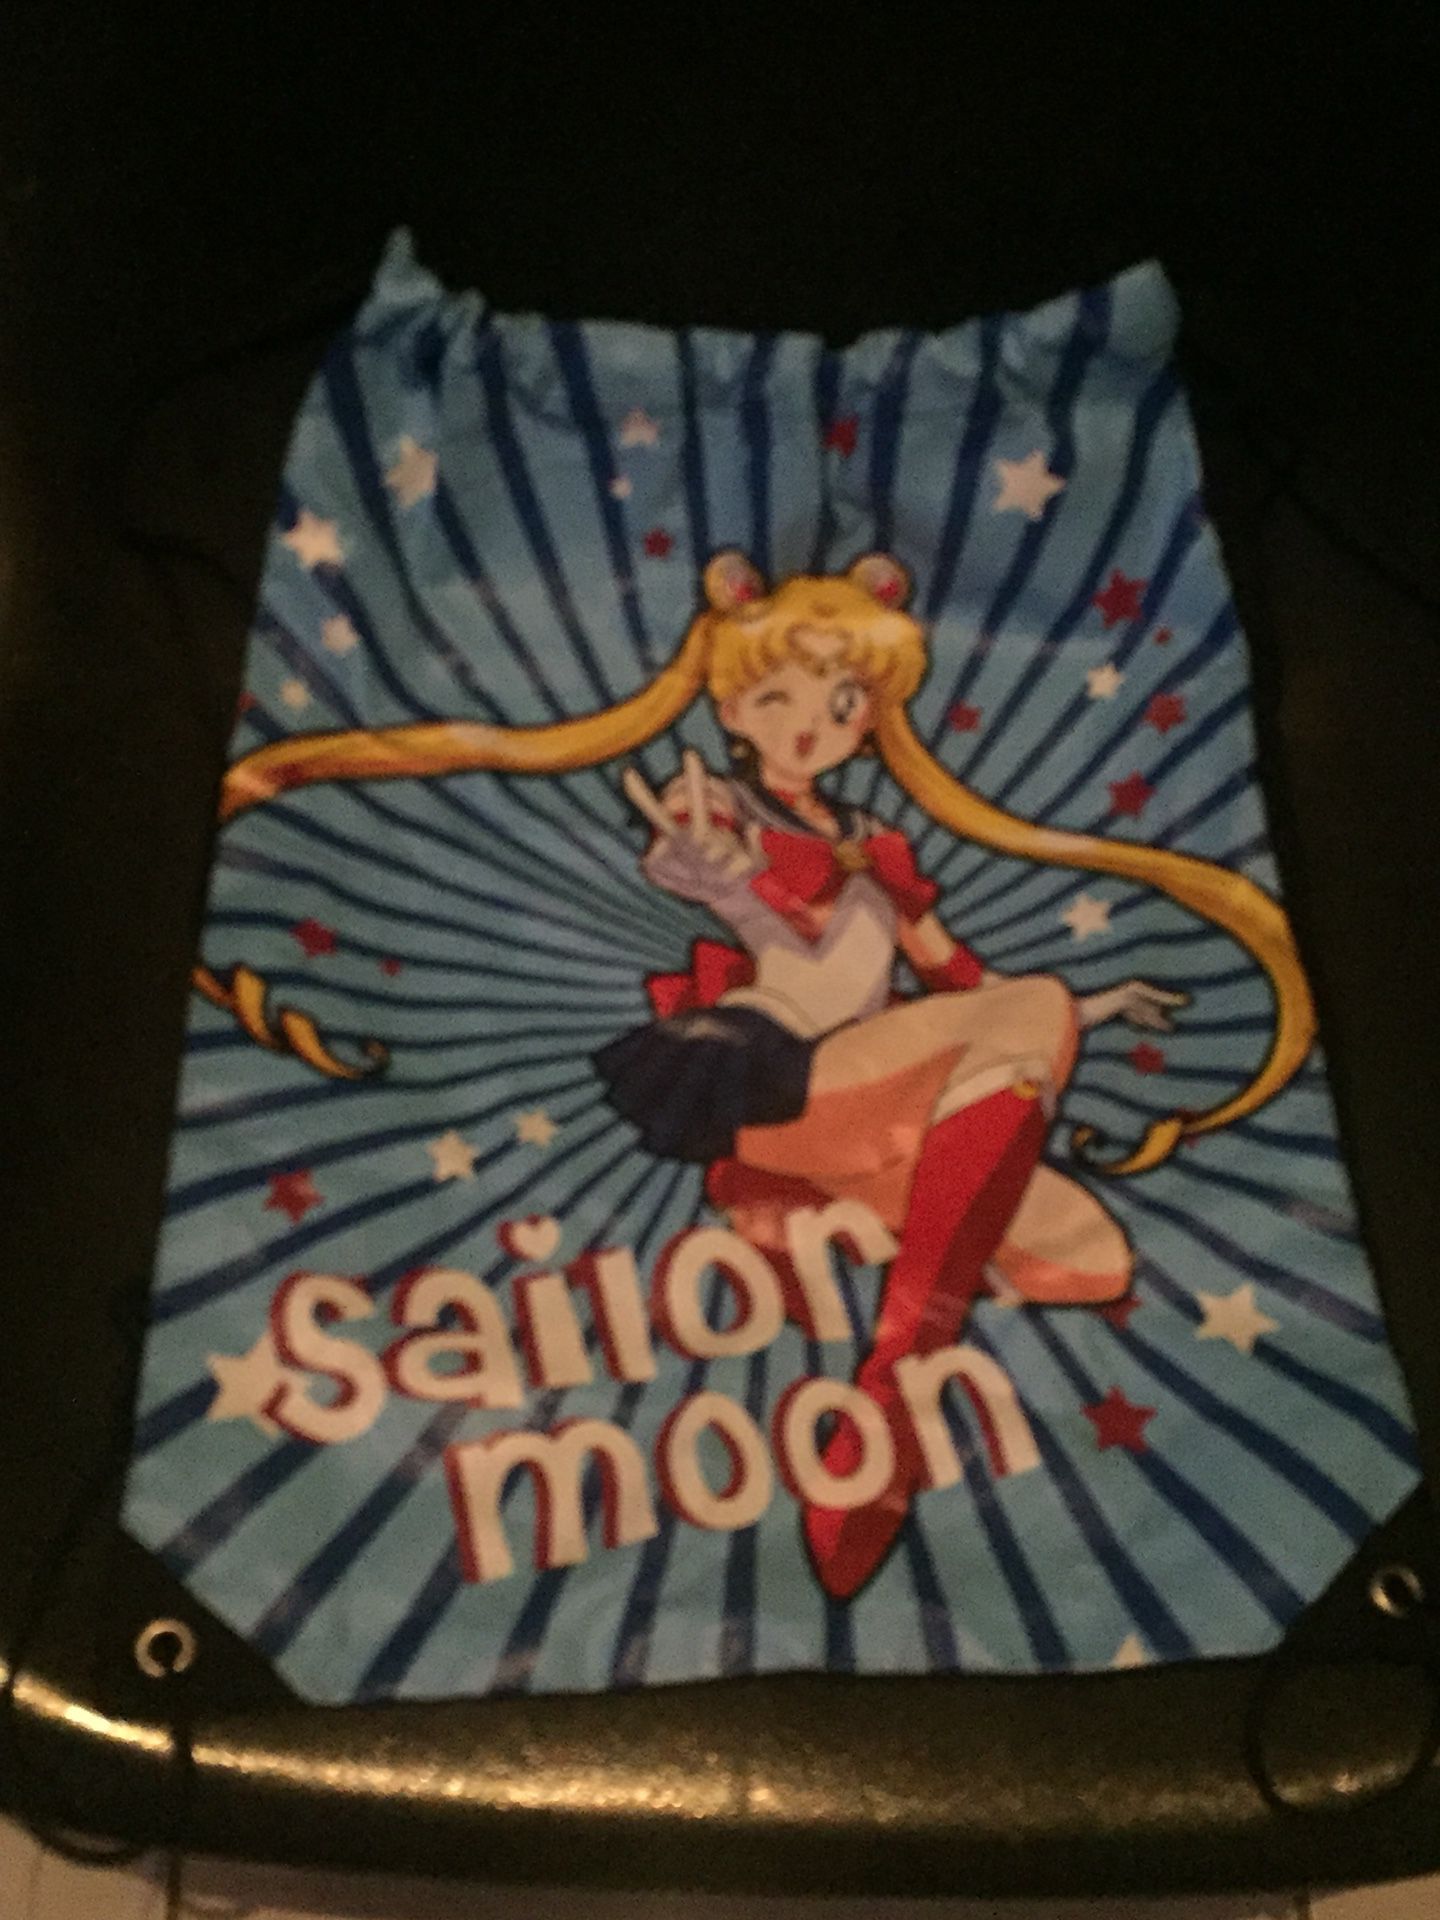 Vintage rare sailor moon string bookbag mint condition never used $40 collectable must pick up 109 ave Flagler st 33172